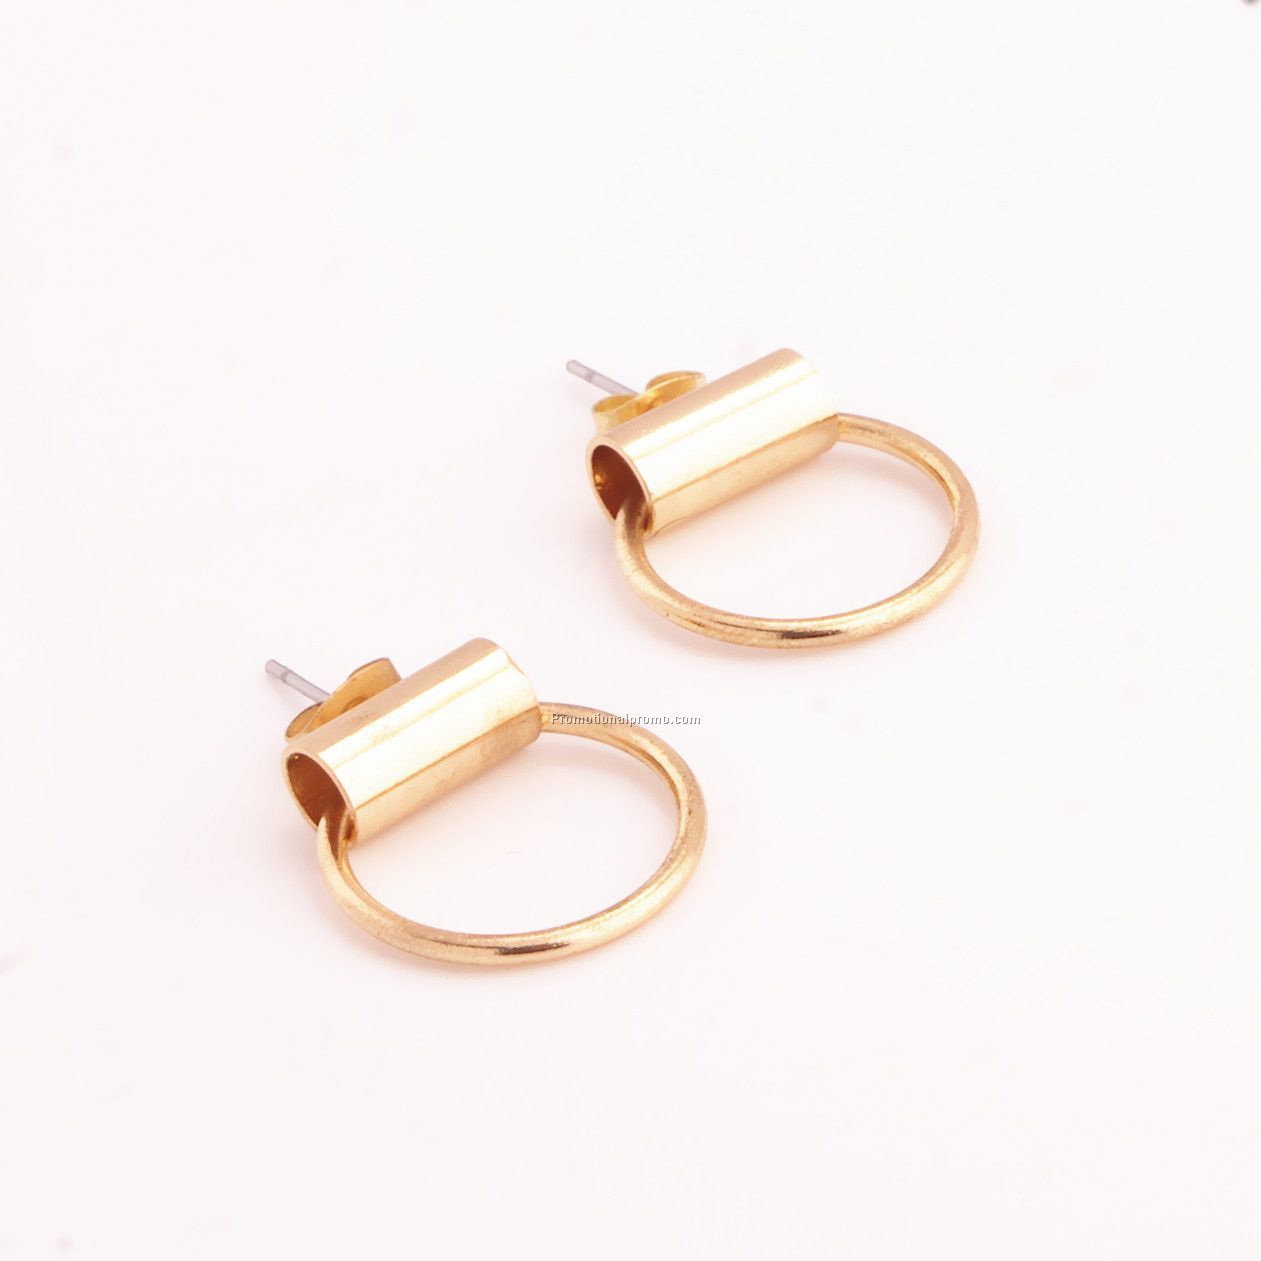 Gold and Silver Latest Fashion Simple Metal Stud Earrings